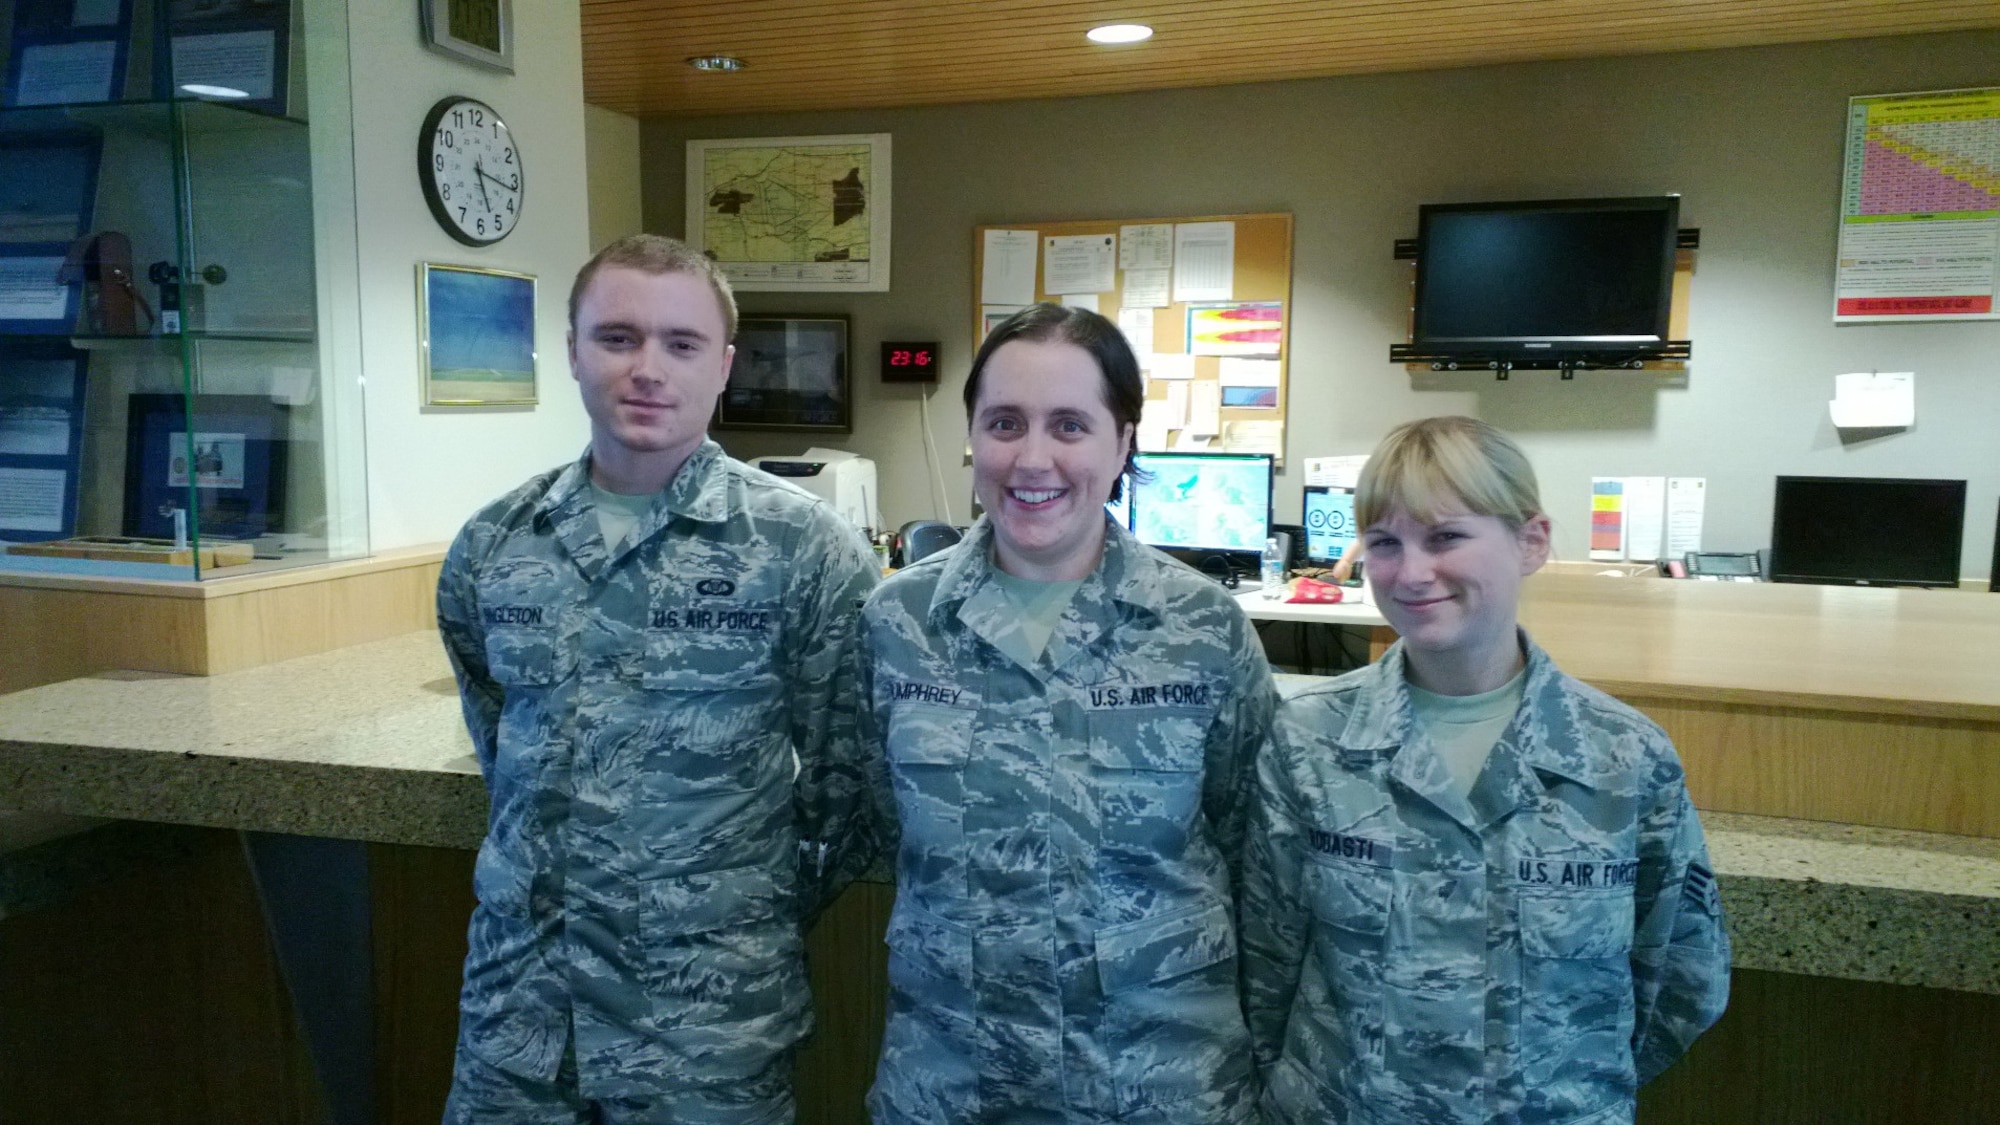 Support personnel from Ellsworth Air Force Base, S.D., pose for a photo. From left to right are Senior Airmen Steven Singleton and Ariell Rodasti, 28th Operations Support Squadron members; and Staff Sgt. Jessica Humphrey, 28th OSS weather member. Support personnel not pictured include Tech. Sgt. Joshua Burback and Master Sgt. James Shoemake, 28th OSS base tower members. (U.S. Air Force photo/Maj. Kurt Ponsor)